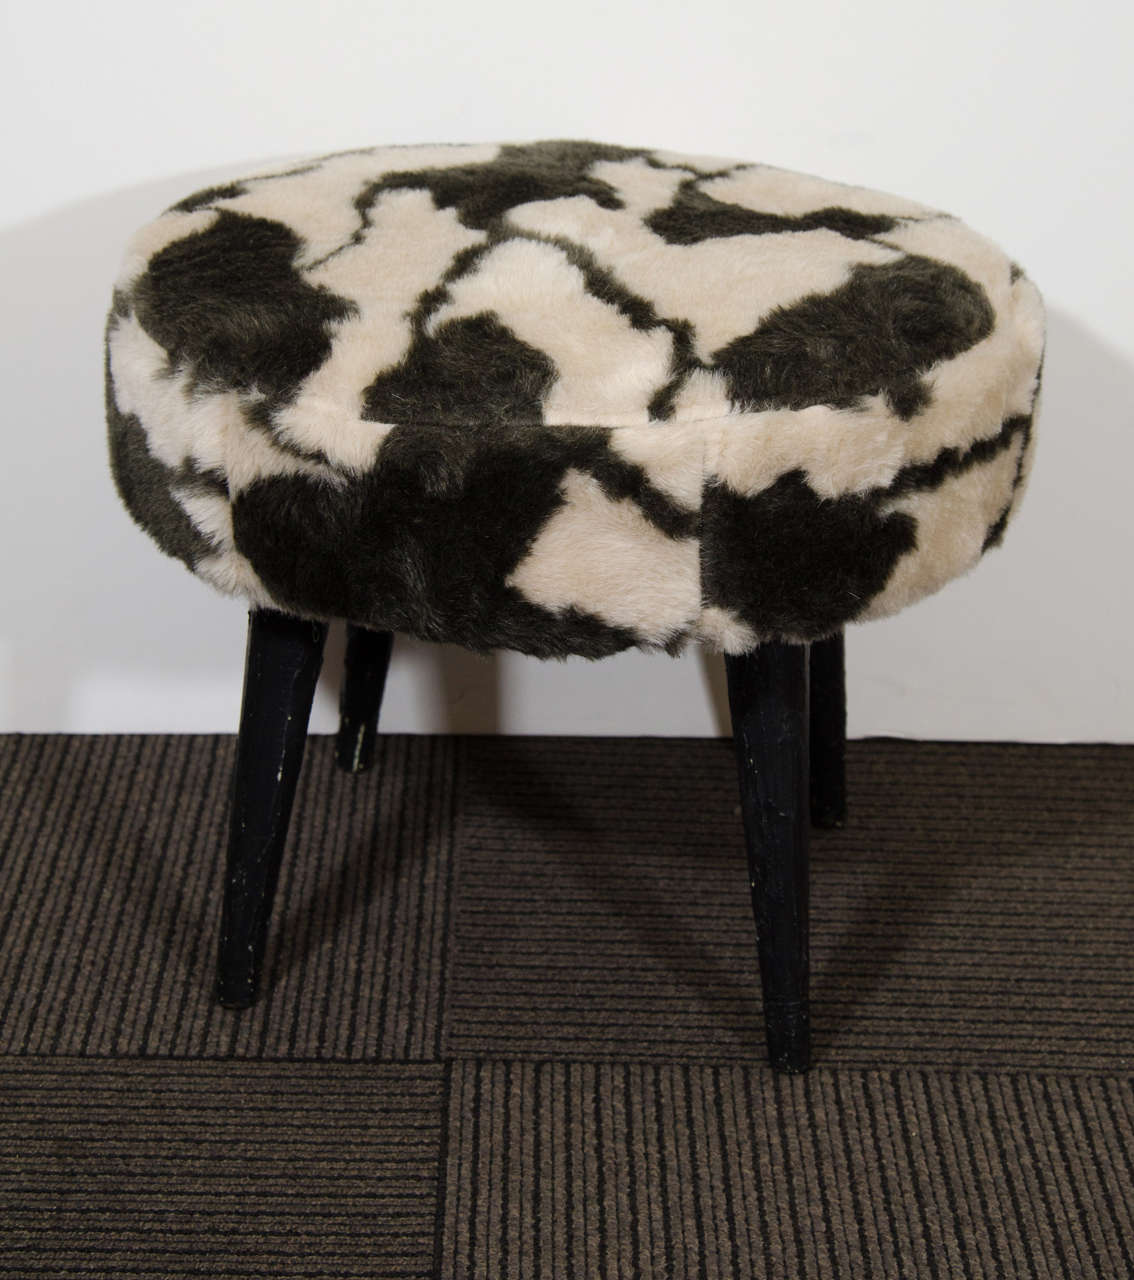 A vintage drum style bench or stool with faux fur animal print upholstery.

Good vintage condition with age appropriate wear. Craquelure to legs. Some scuffs.

Reduced from:  $650